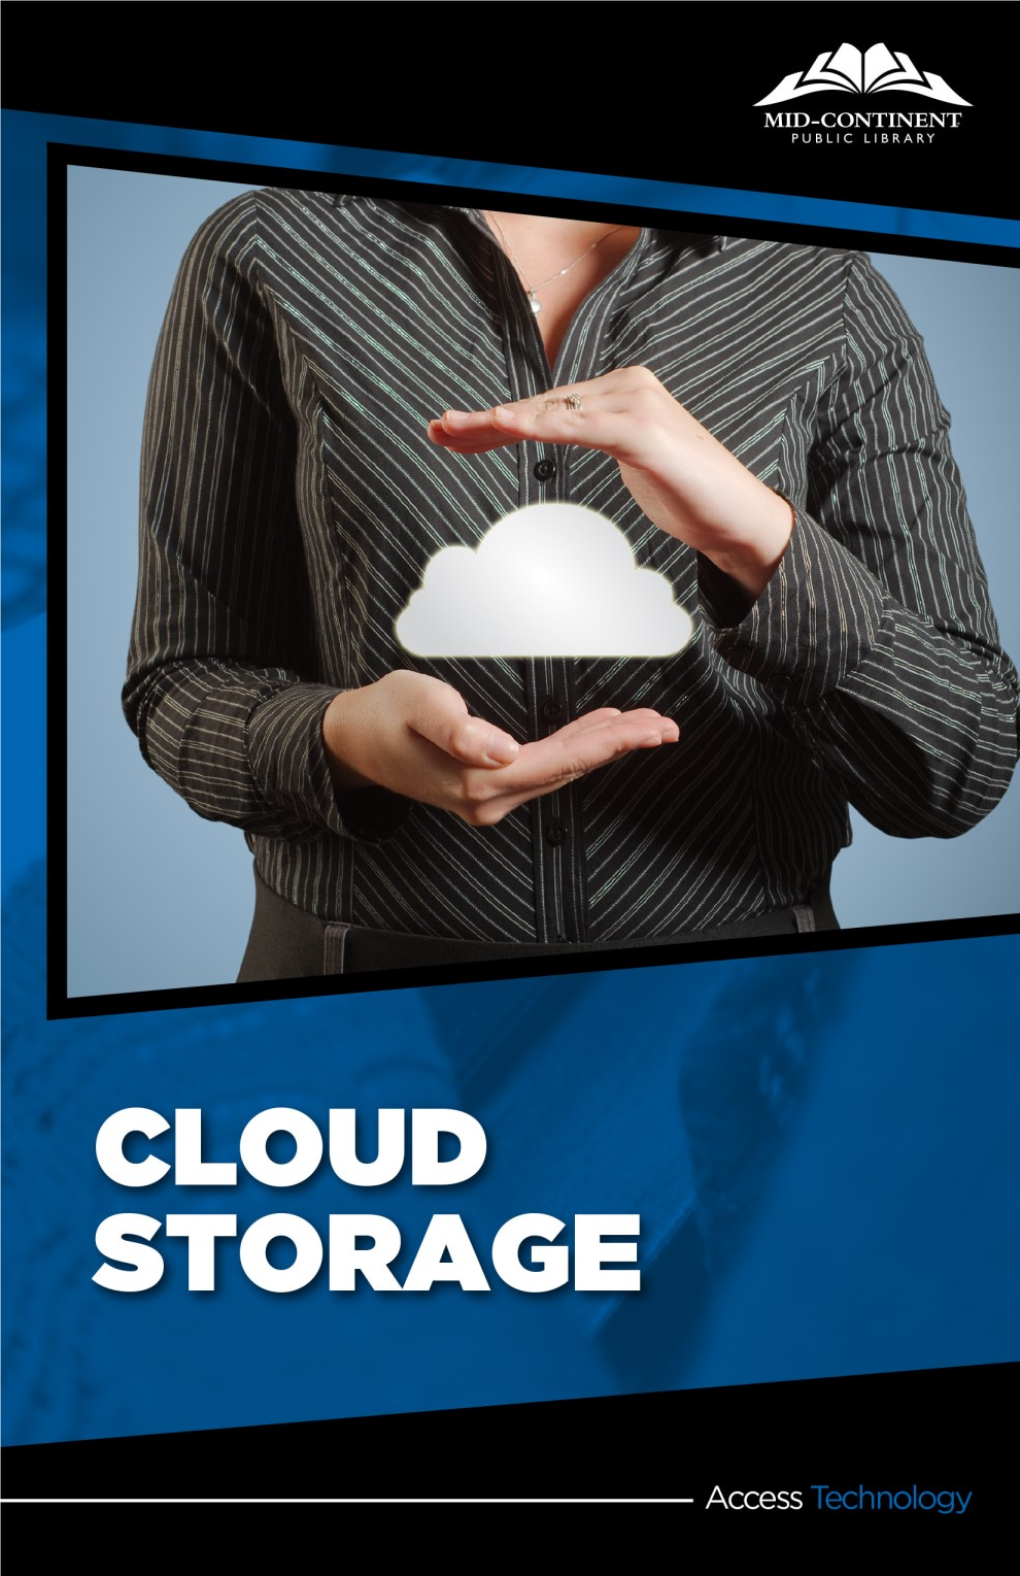 WHAT IS CLOUD STORAGE When Creating a Digital File, Most People Will Save the File on the Computer Itself Or on a Small Flash Drive